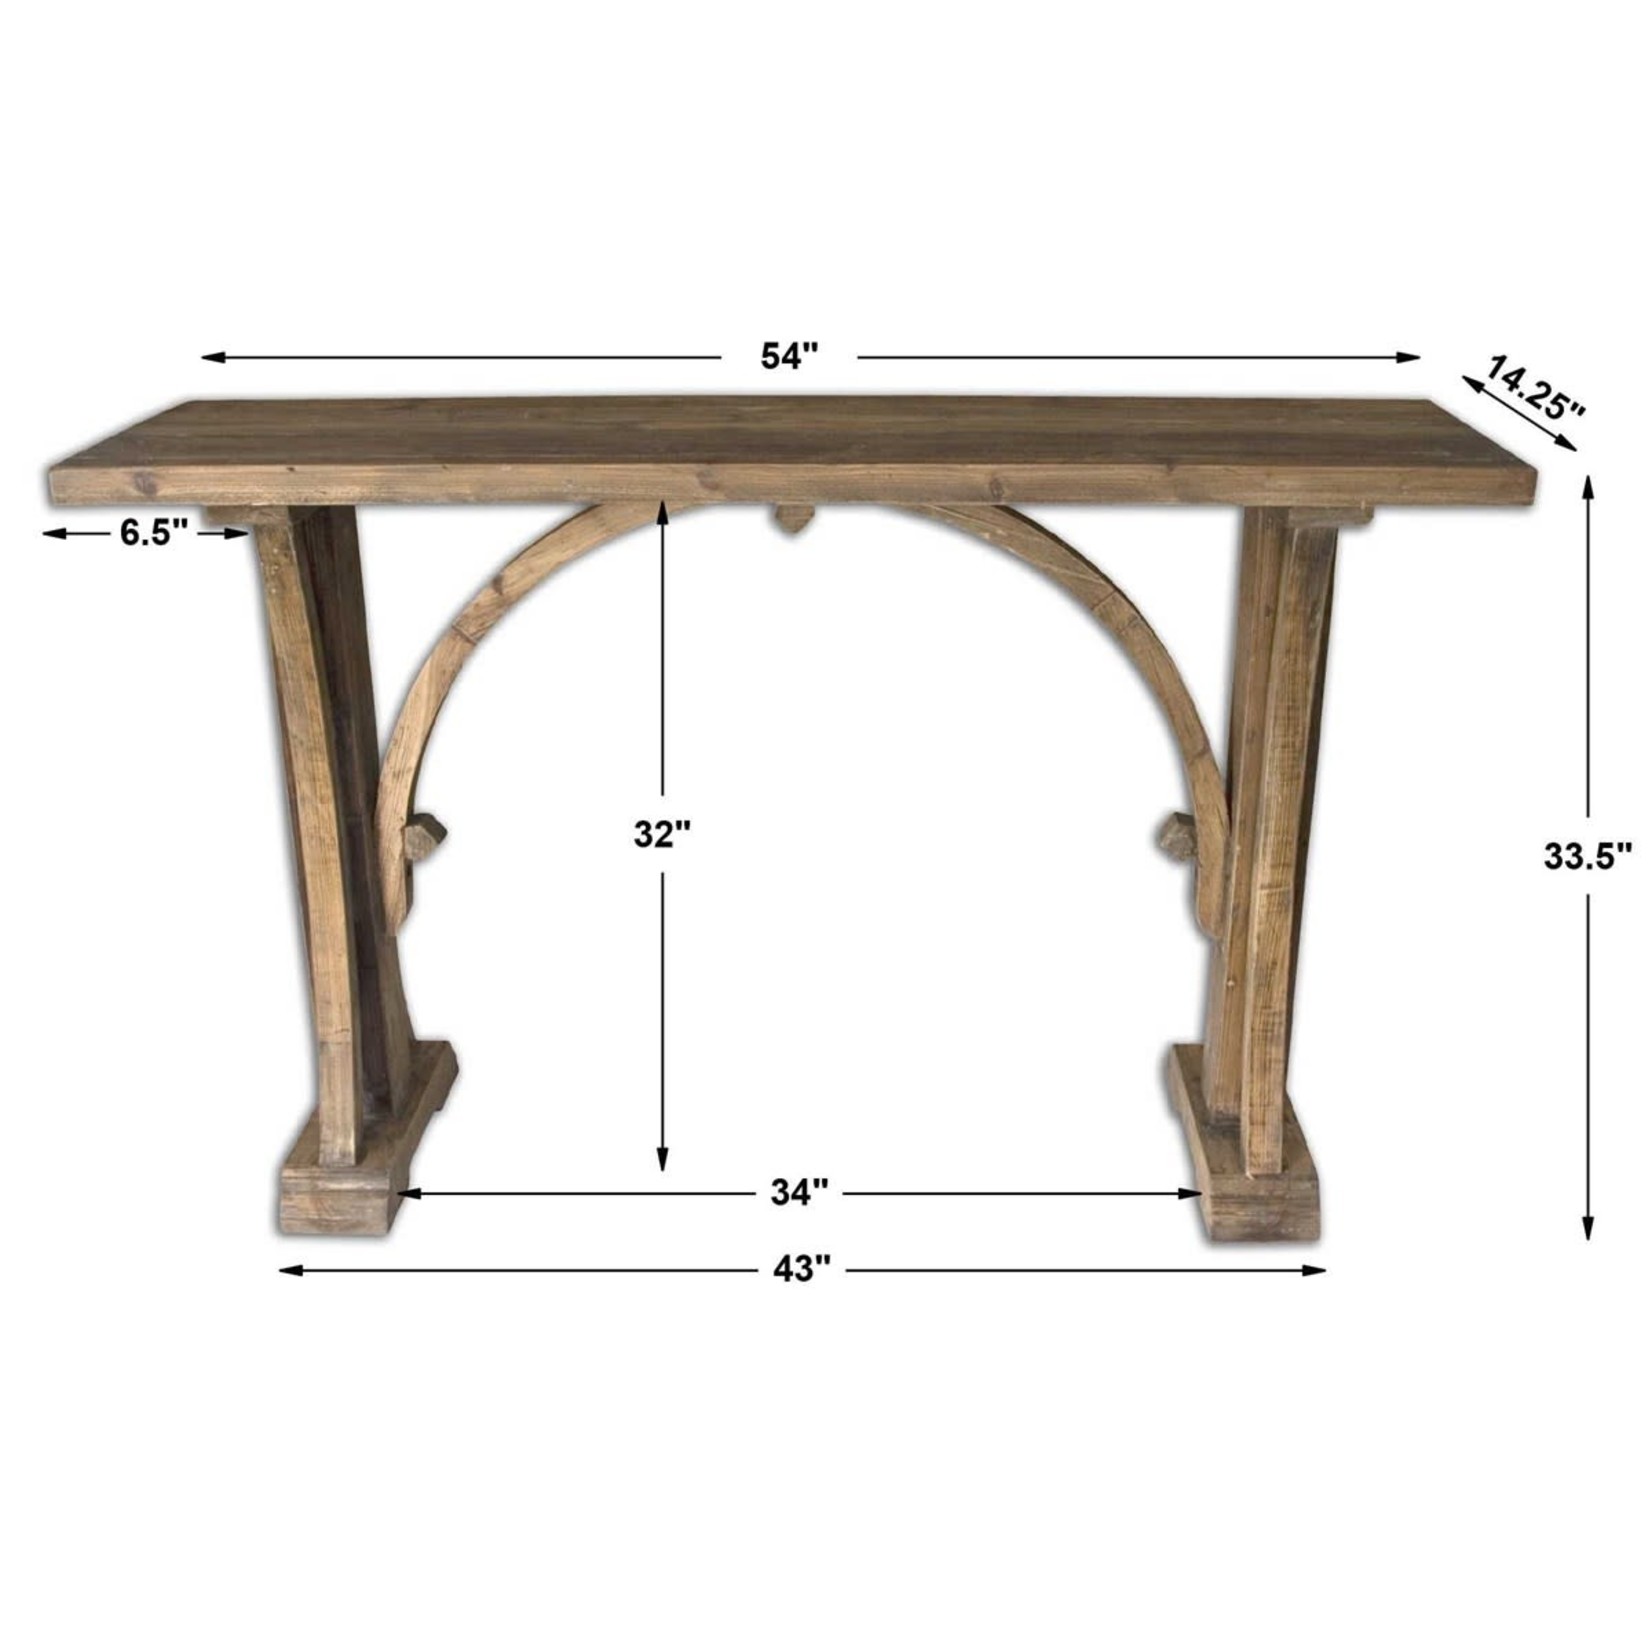 Uttermost Genessis Console Table